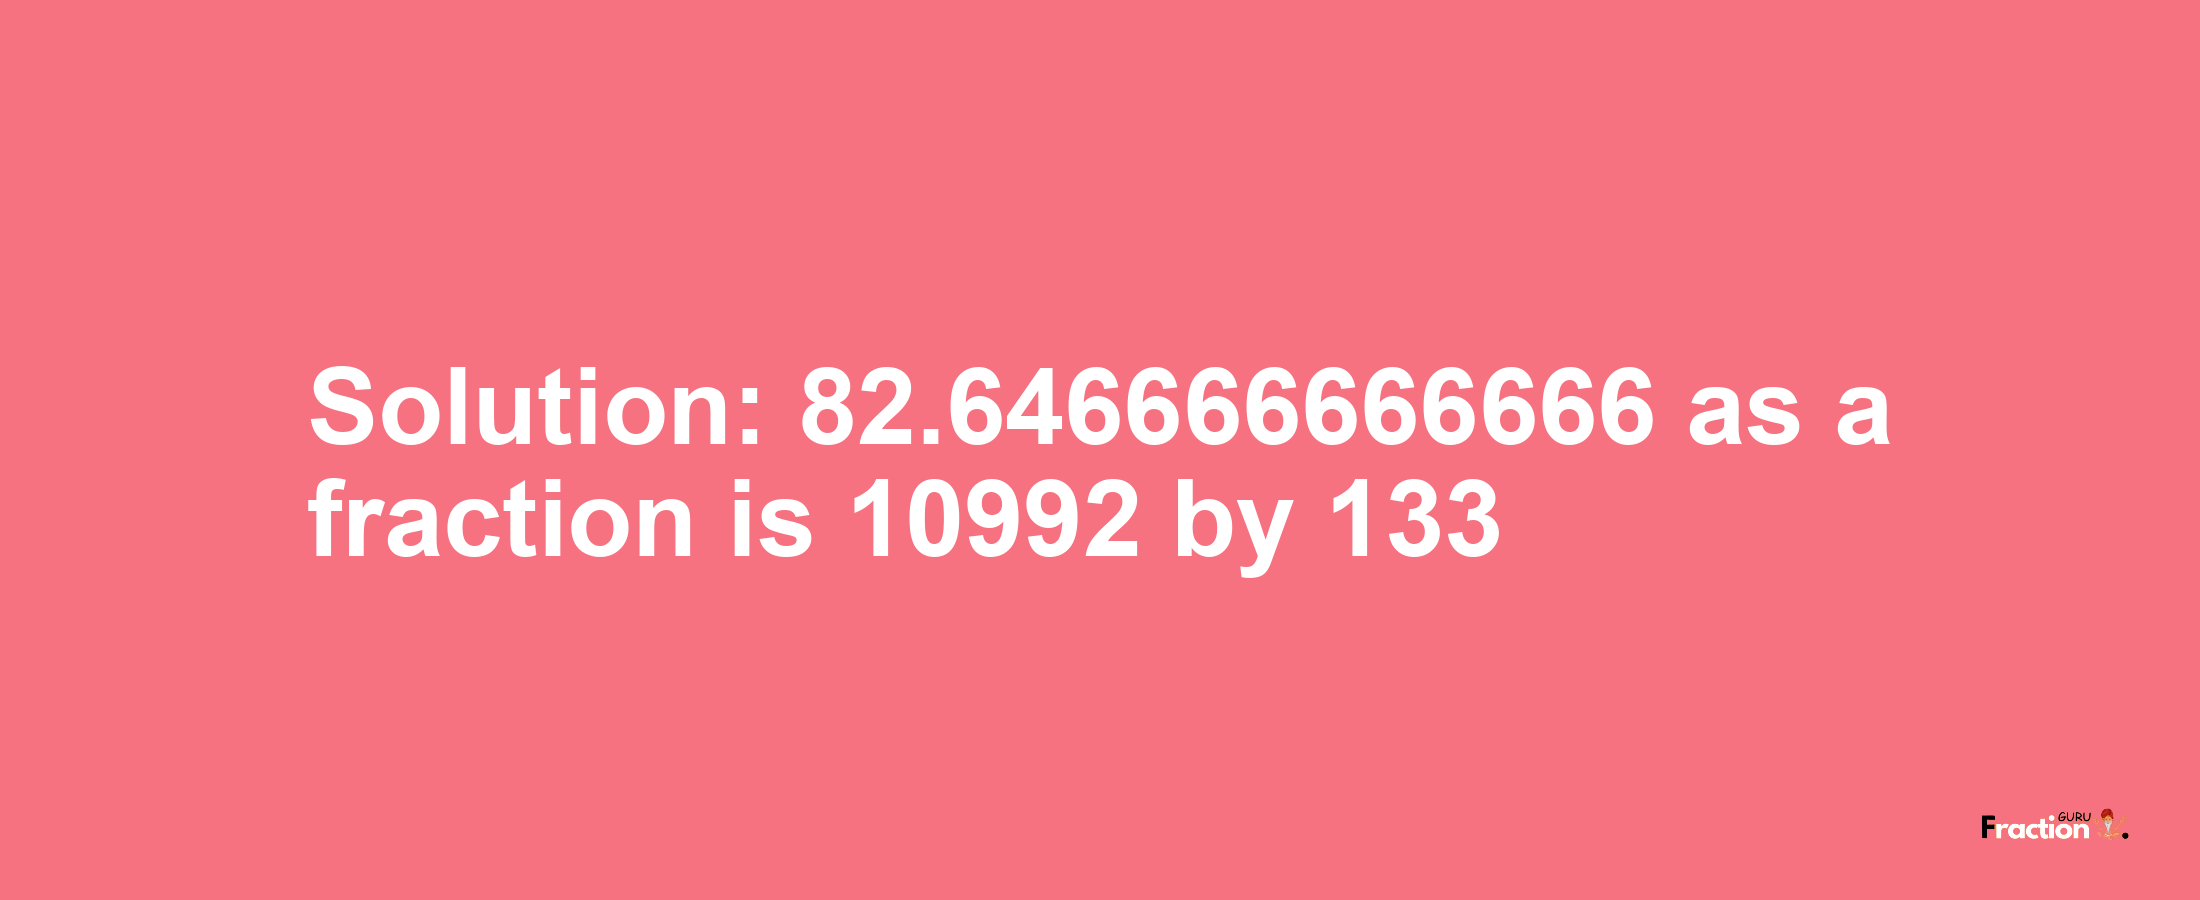 Solution:82.646666666666 as a fraction is 10992/133